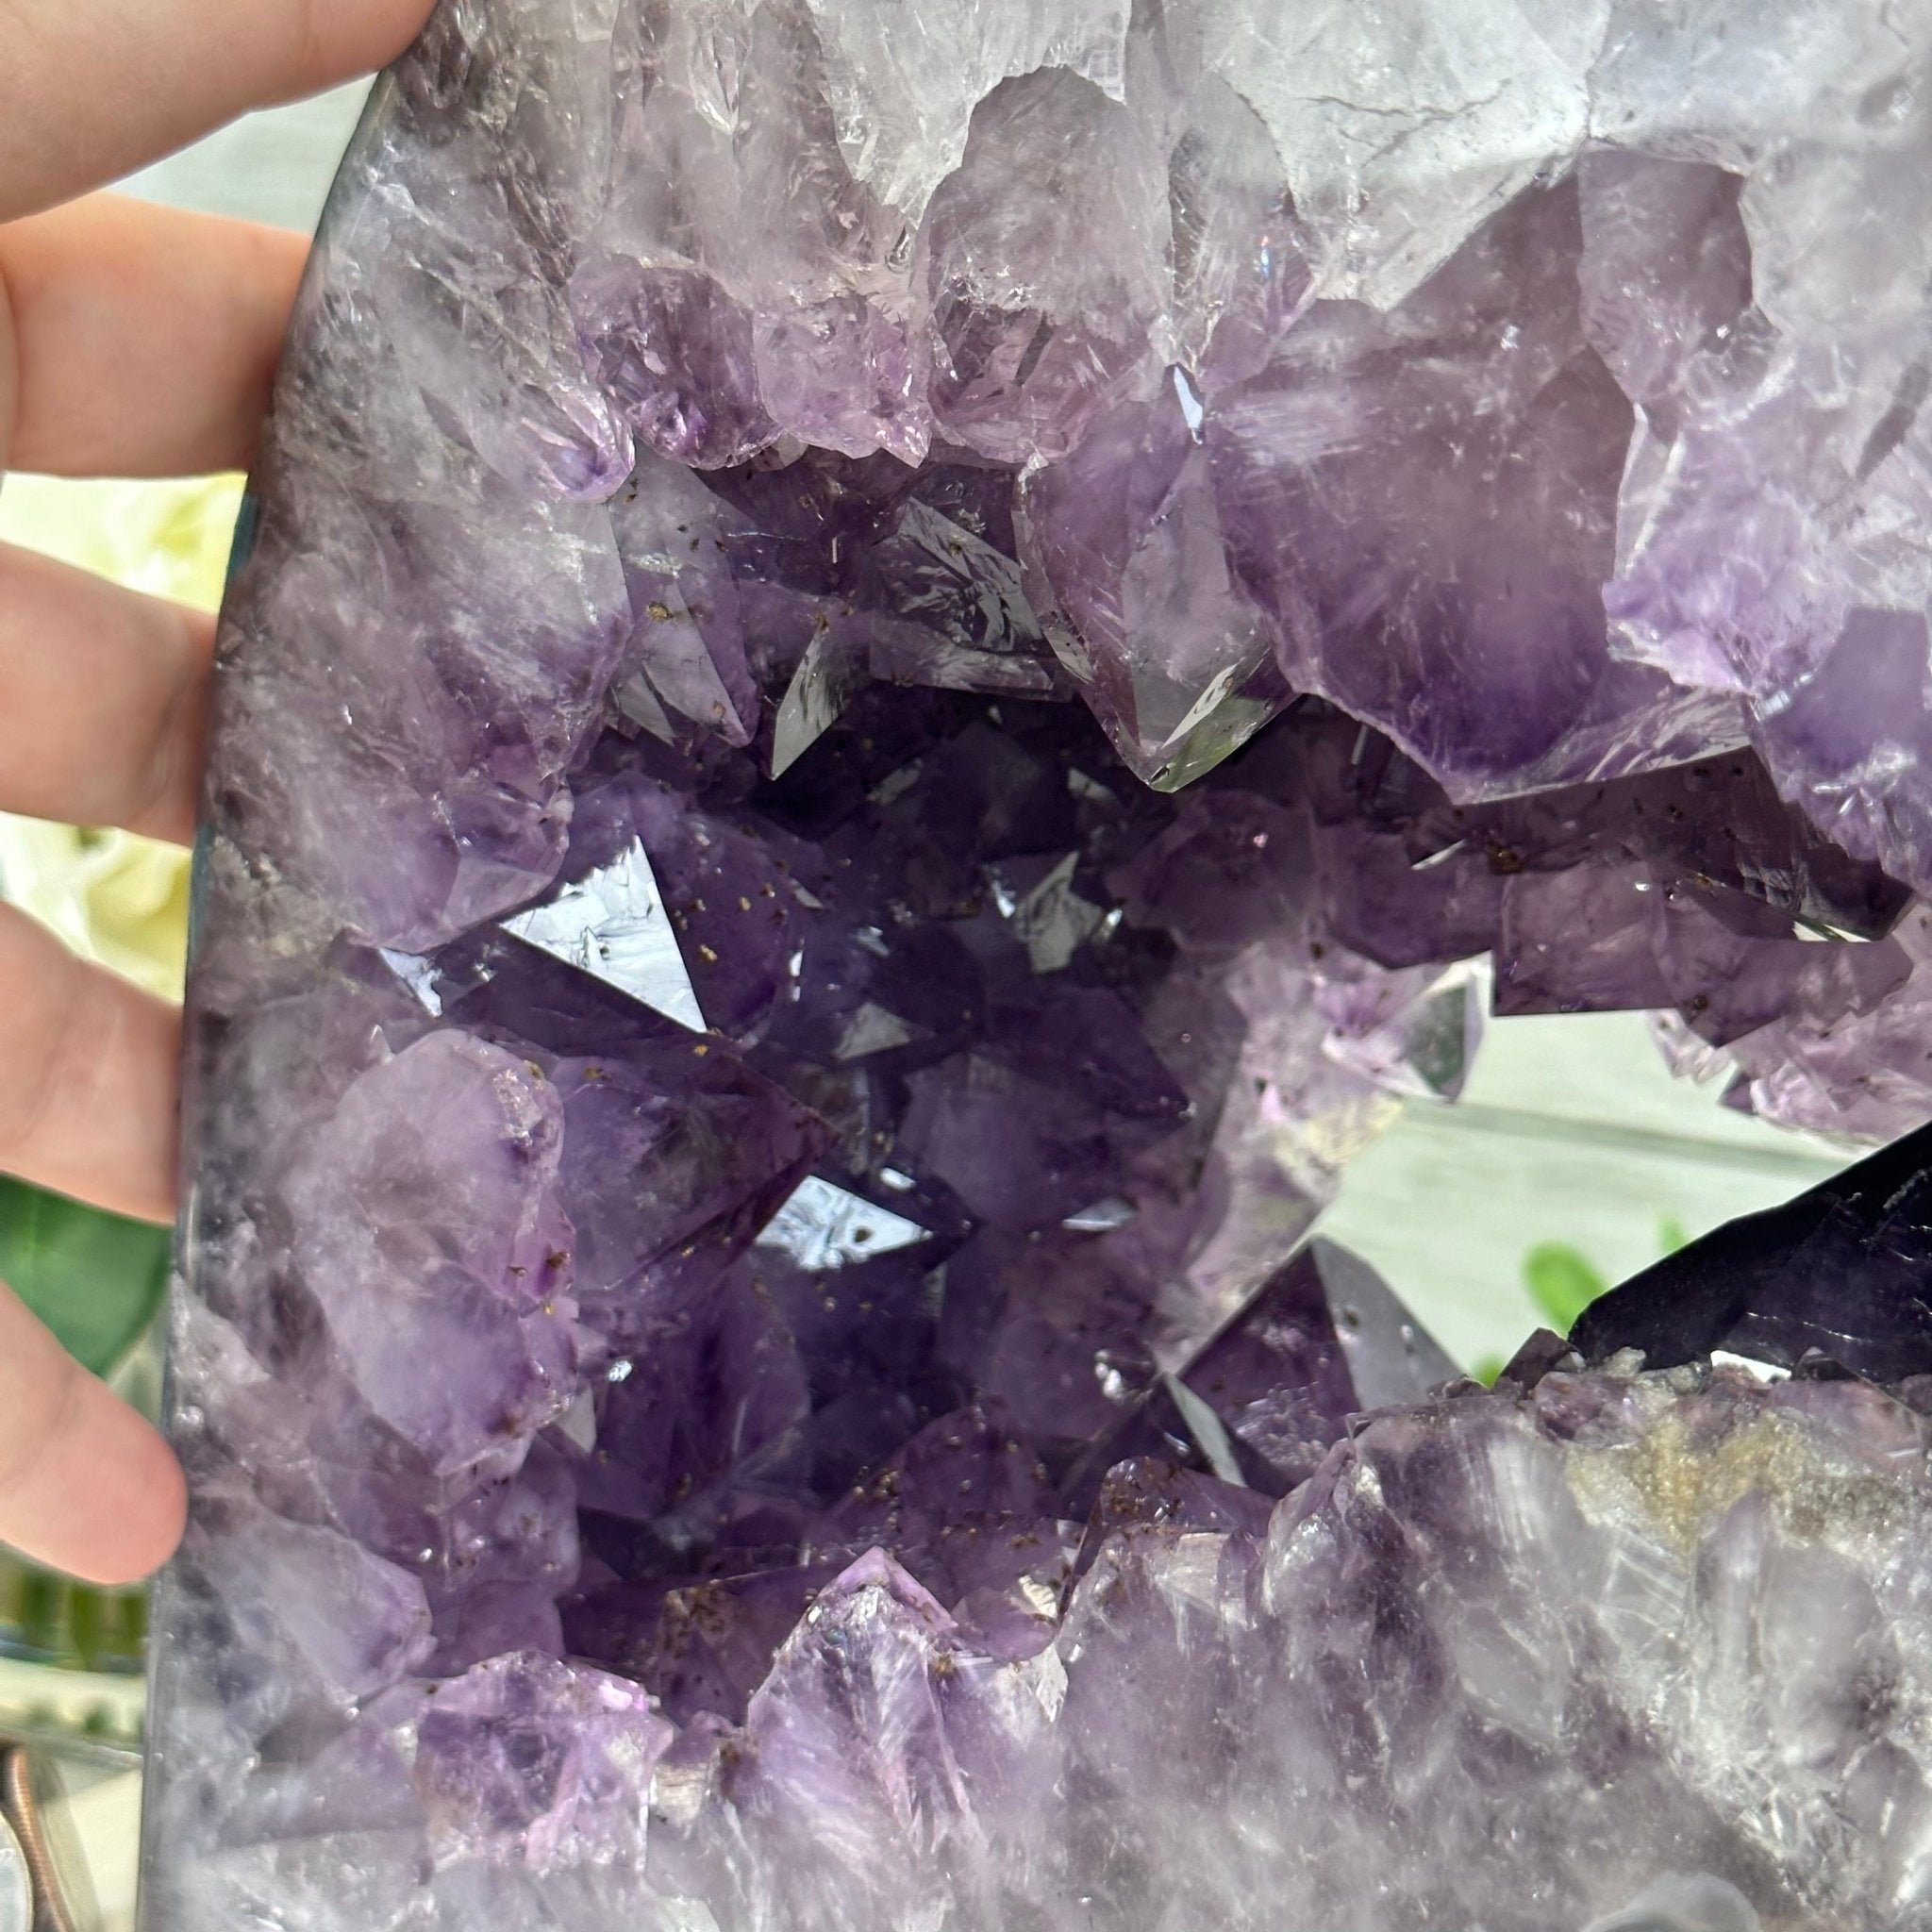 Standard Plus Quality Open 2-Sided Brazilian Amethyst Cathedral, 20.9 lbs, 9.75" tall, Model #5605-0128 by Brazil Gems - Brazil GemsBrazil GemsStandard Plus Quality Open 2-Sided Brazilian Amethyst Cathedral, 20.9 lbs, 9.75" tall, Model #5605-0128 by Brazil GemsOpen 2-Sided Cathedrals5605-0128